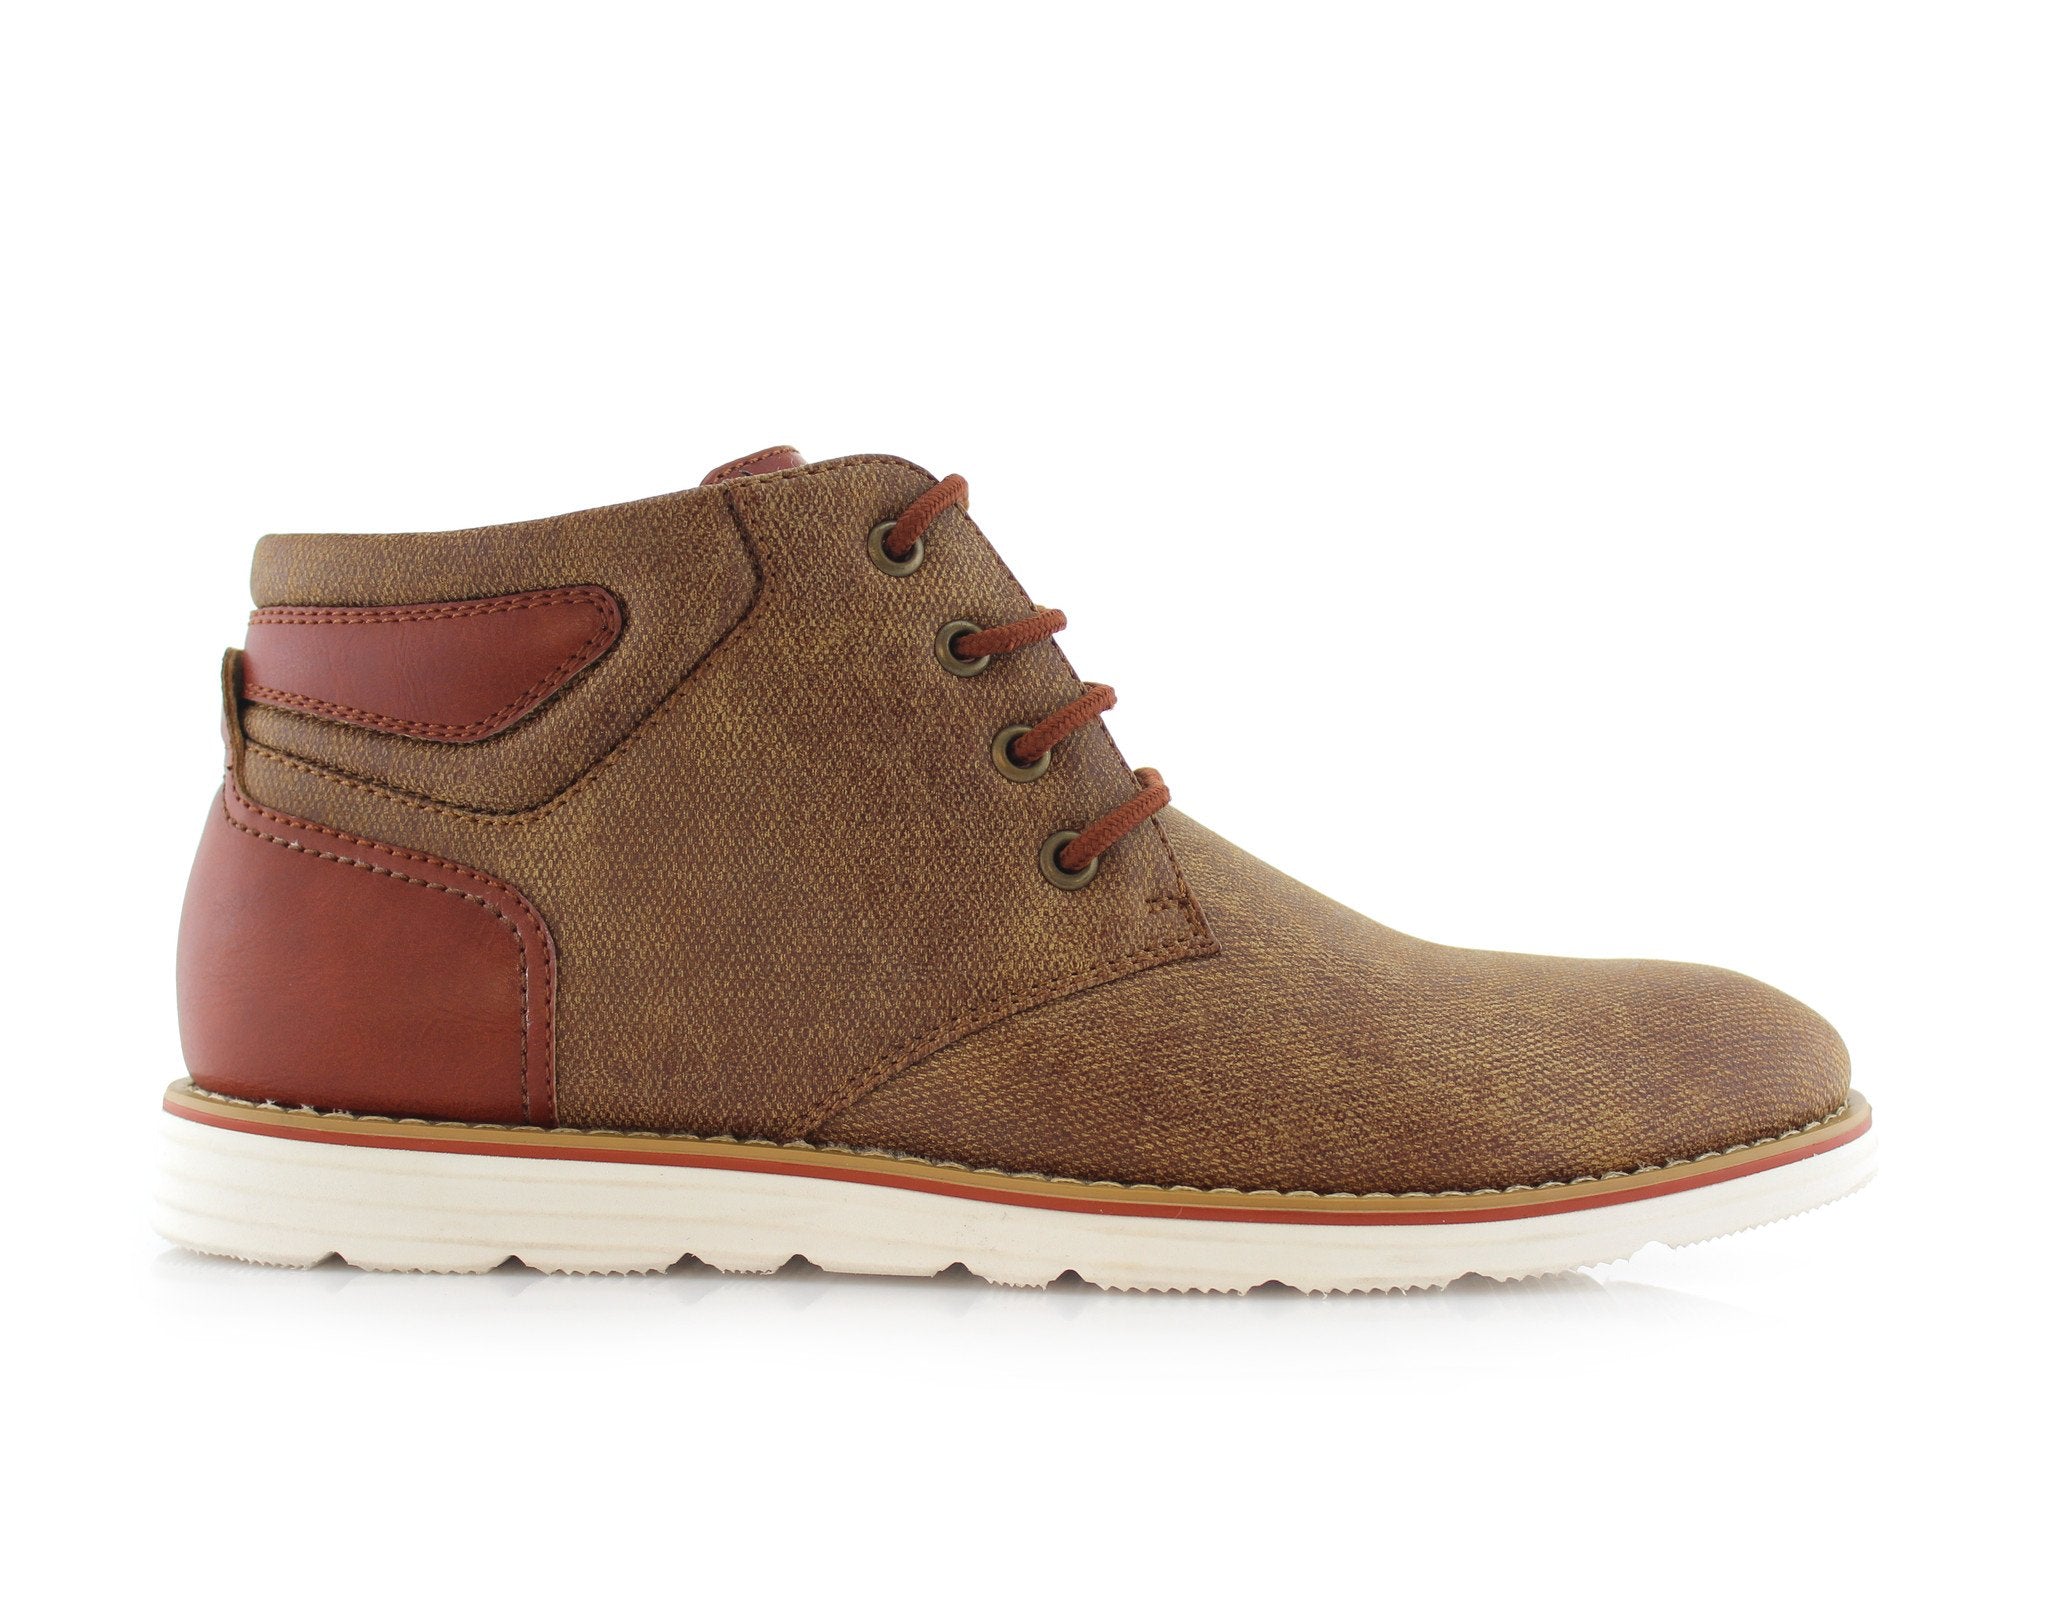 Two-Toned Chukka Sneaker Boots | Owen by Ferro Aldo | Conal Footwear | Outer Side Angle View